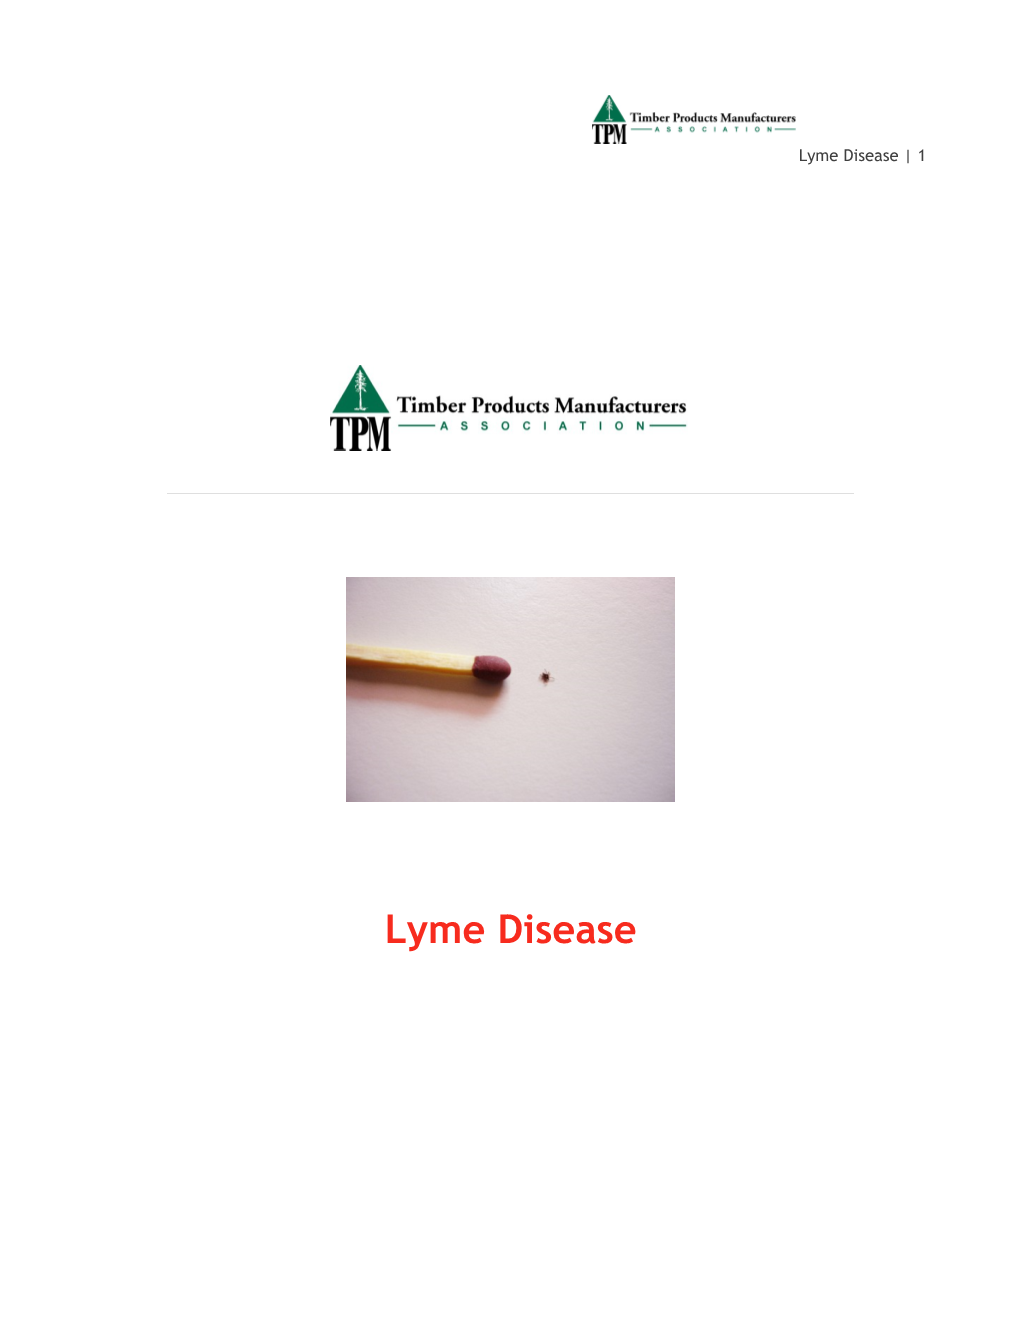 Lyme Disease Is a Multisystem, Multistage, Inflammatory Disease Caused by a Bacterium